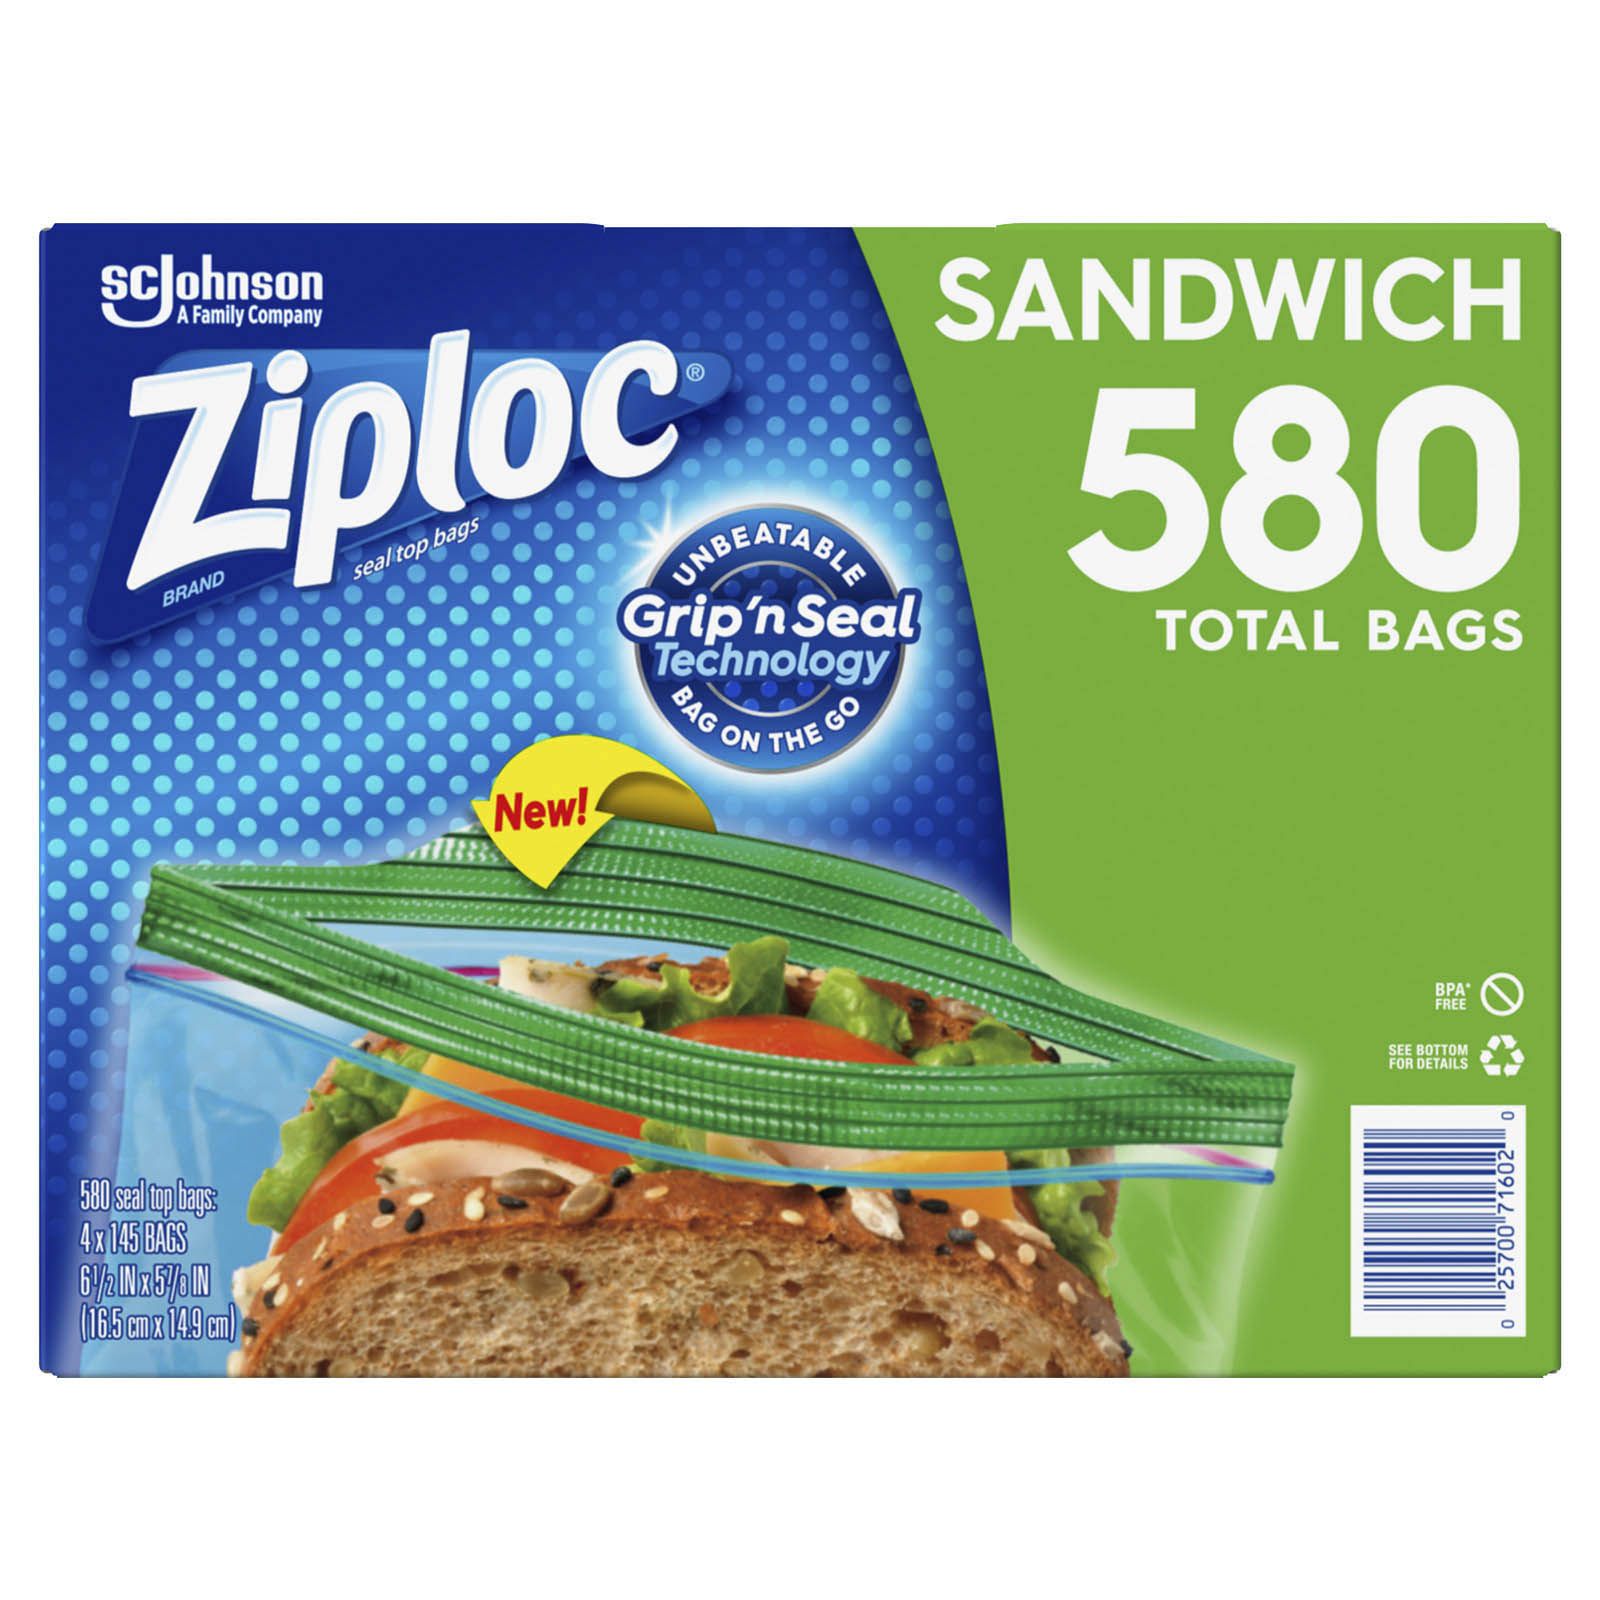 Ziploc Holiday Bags: Gallon Freezer 120-Count as low as $12.58 -10